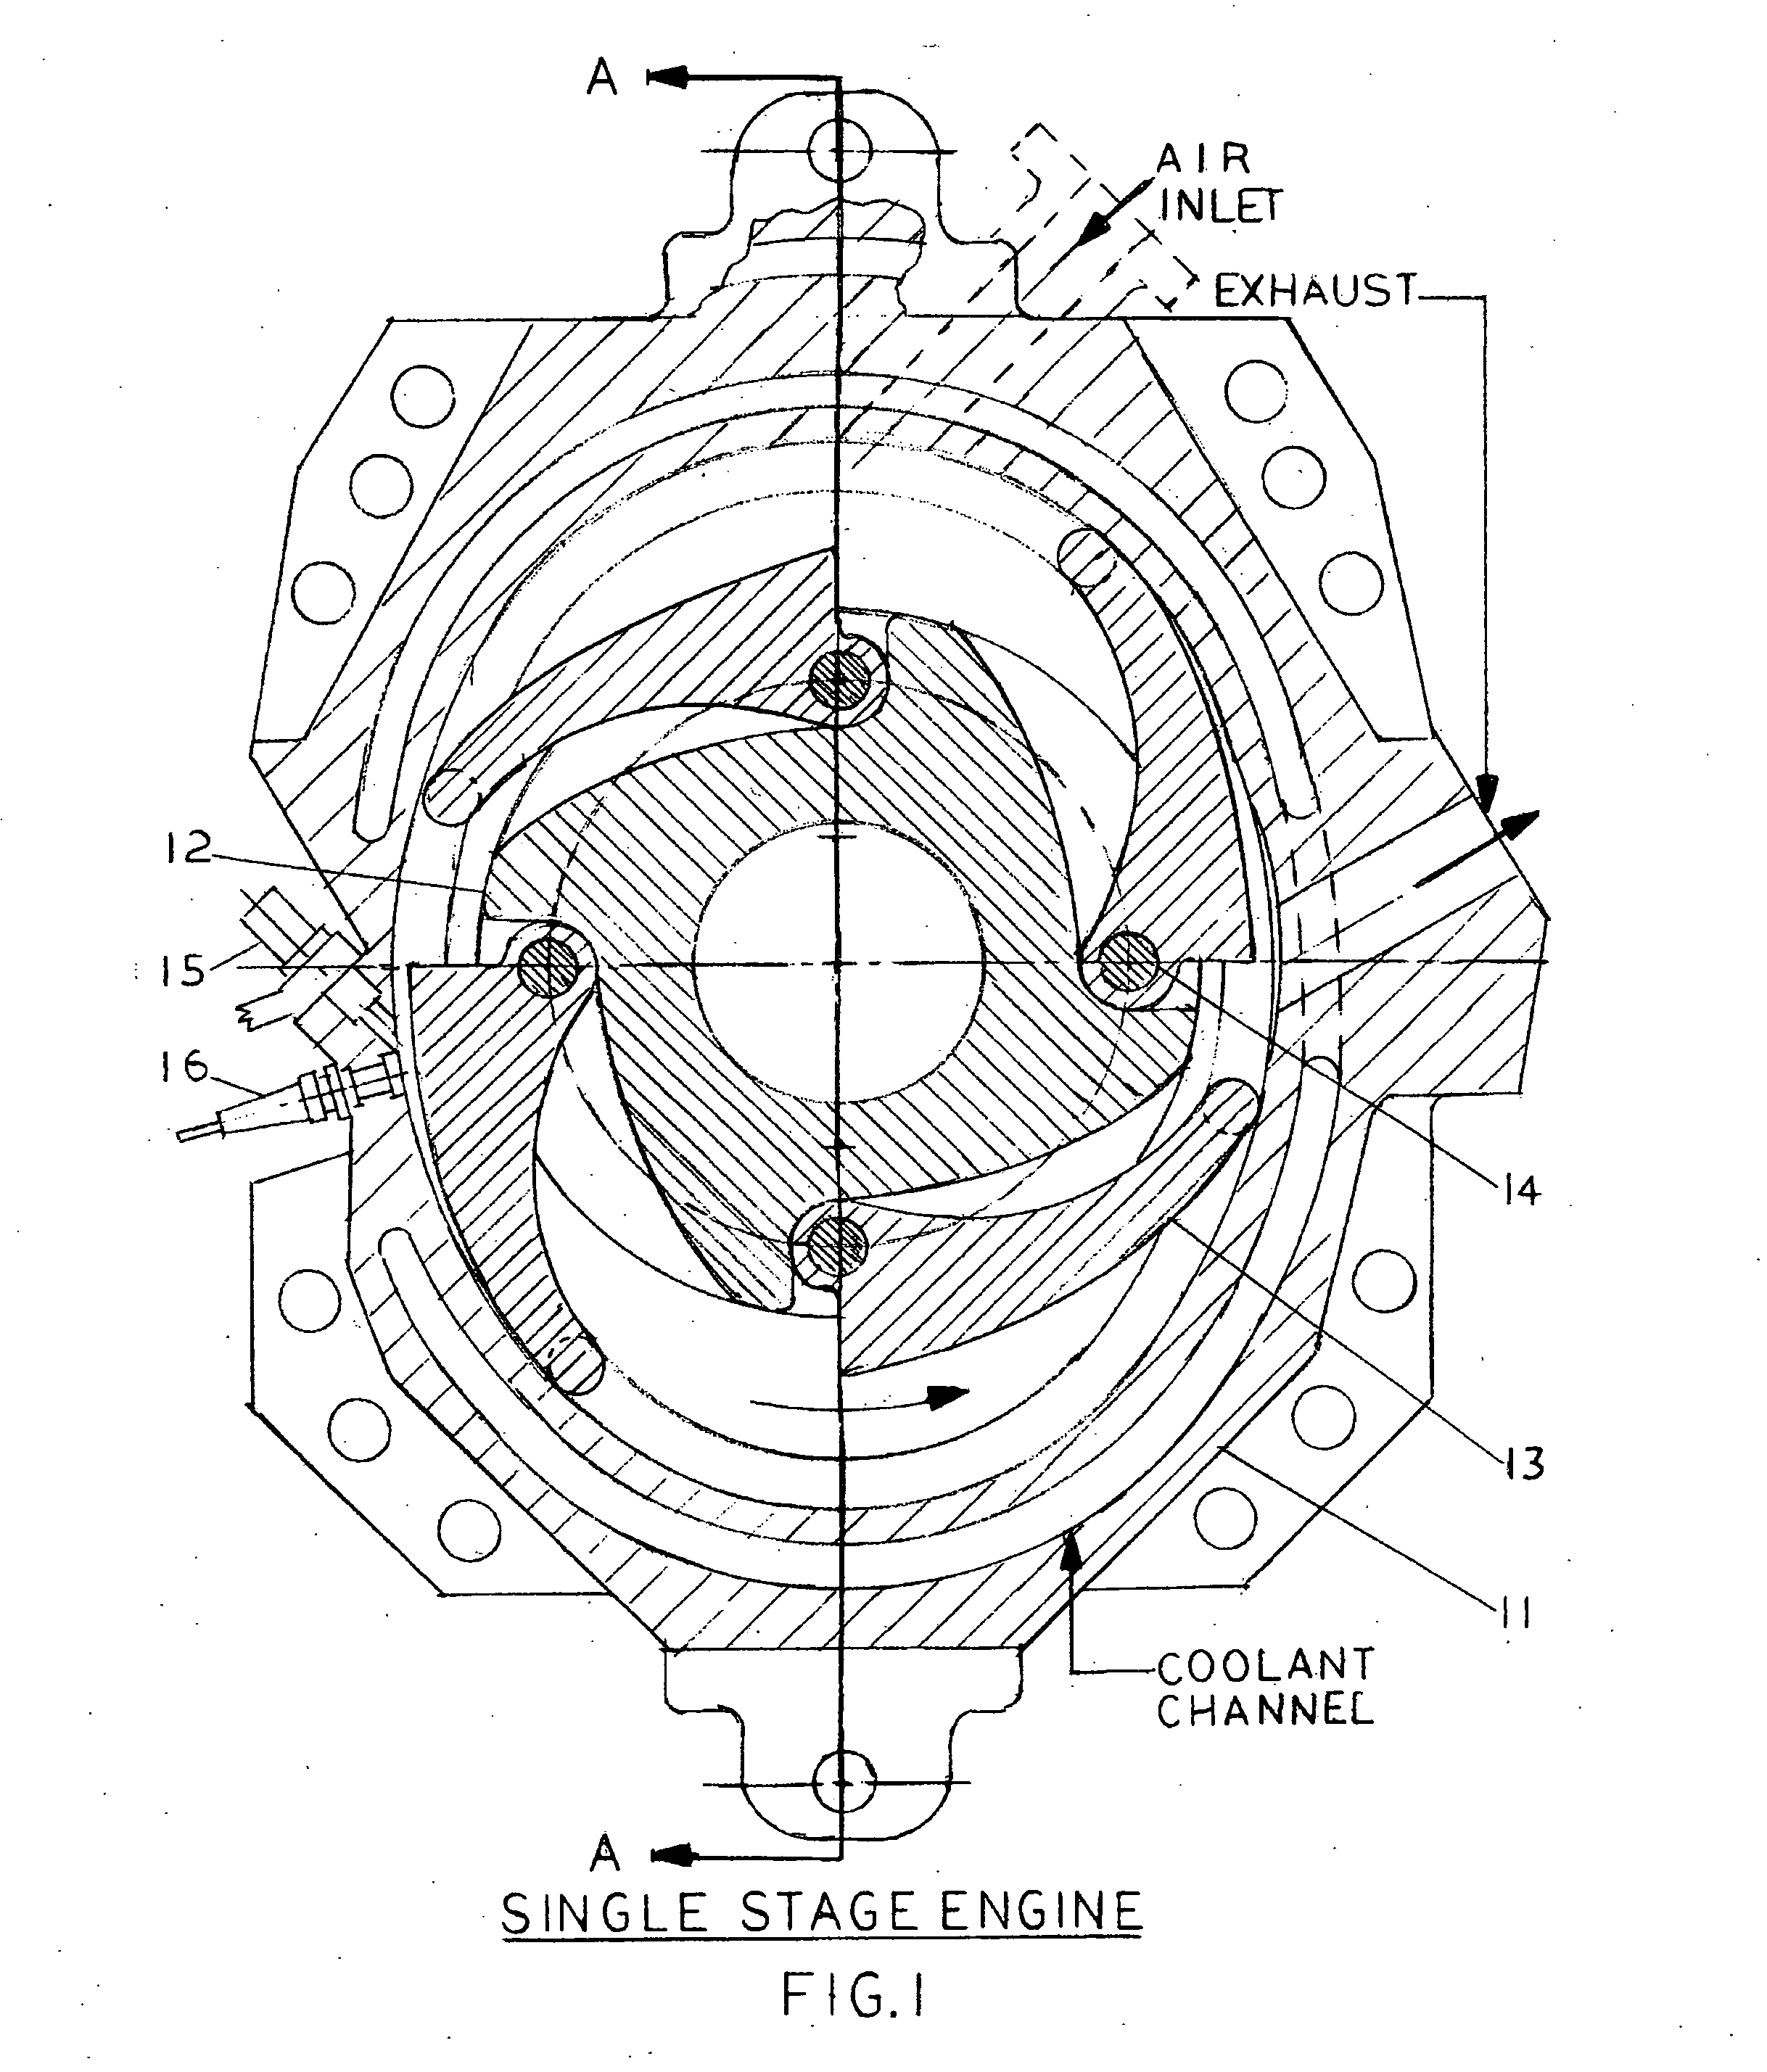 Single-stage and three-stage internal combusion rotary engines